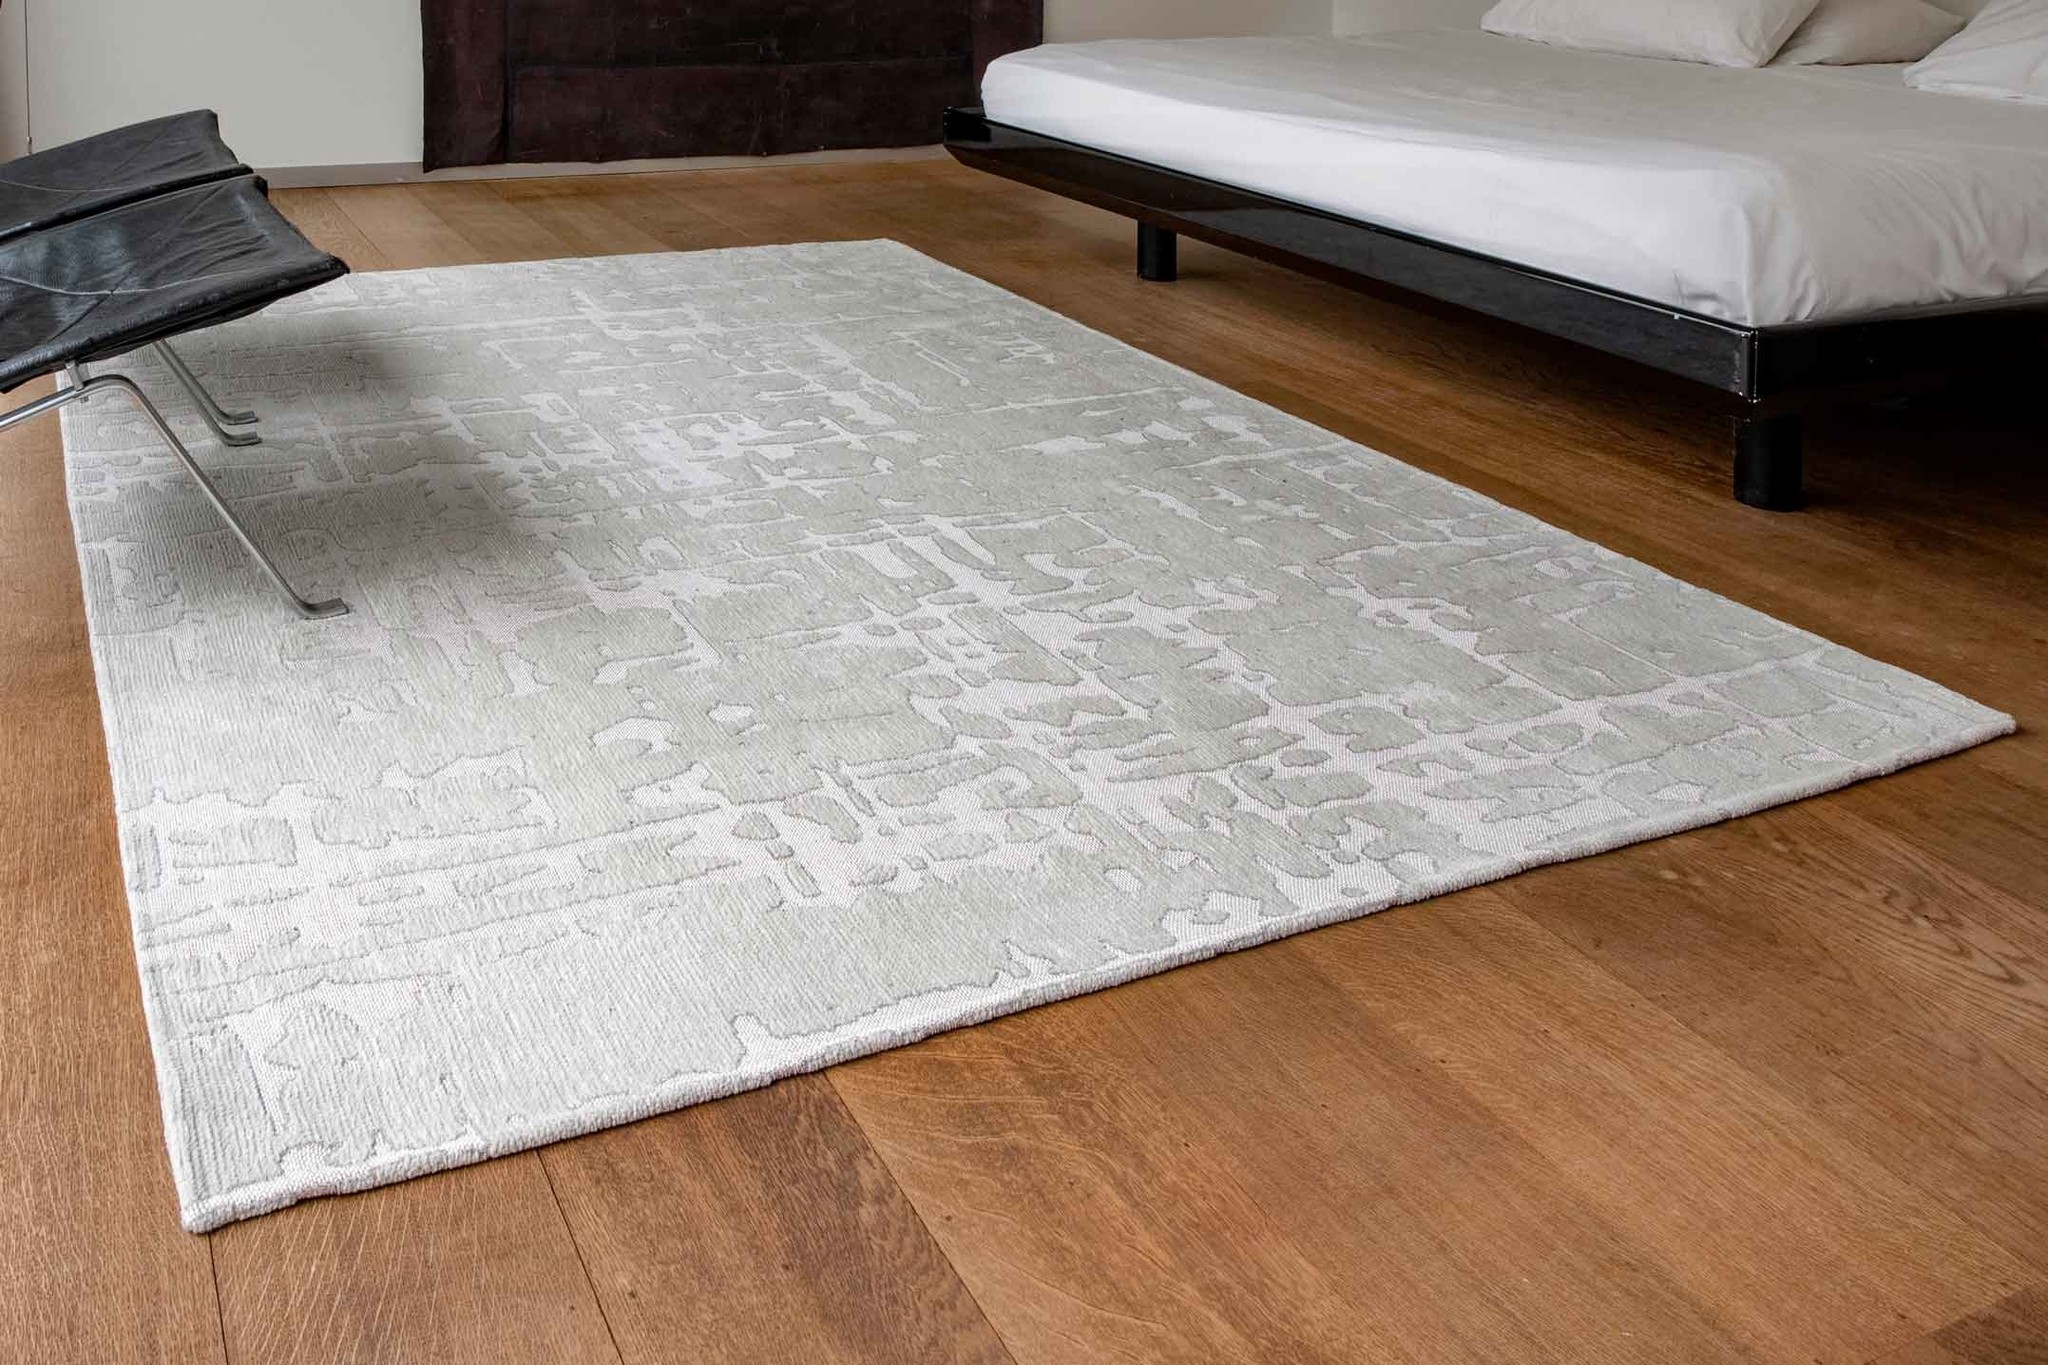 Abstract Silver Belgian Rug ☞ Size: 6' 7" x 9' 2" (200 x 280 cm)